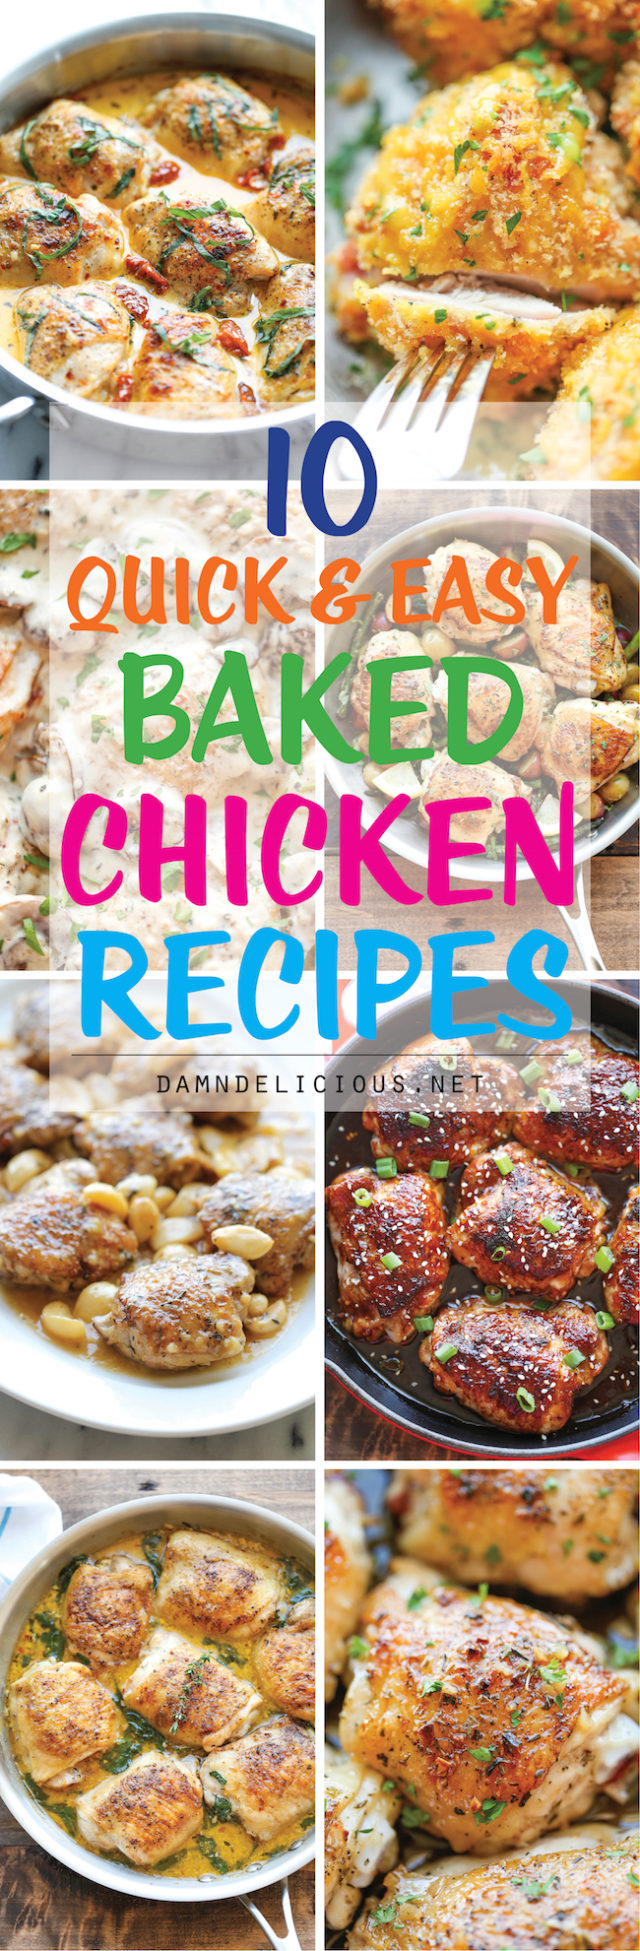 different baked chicken recipes